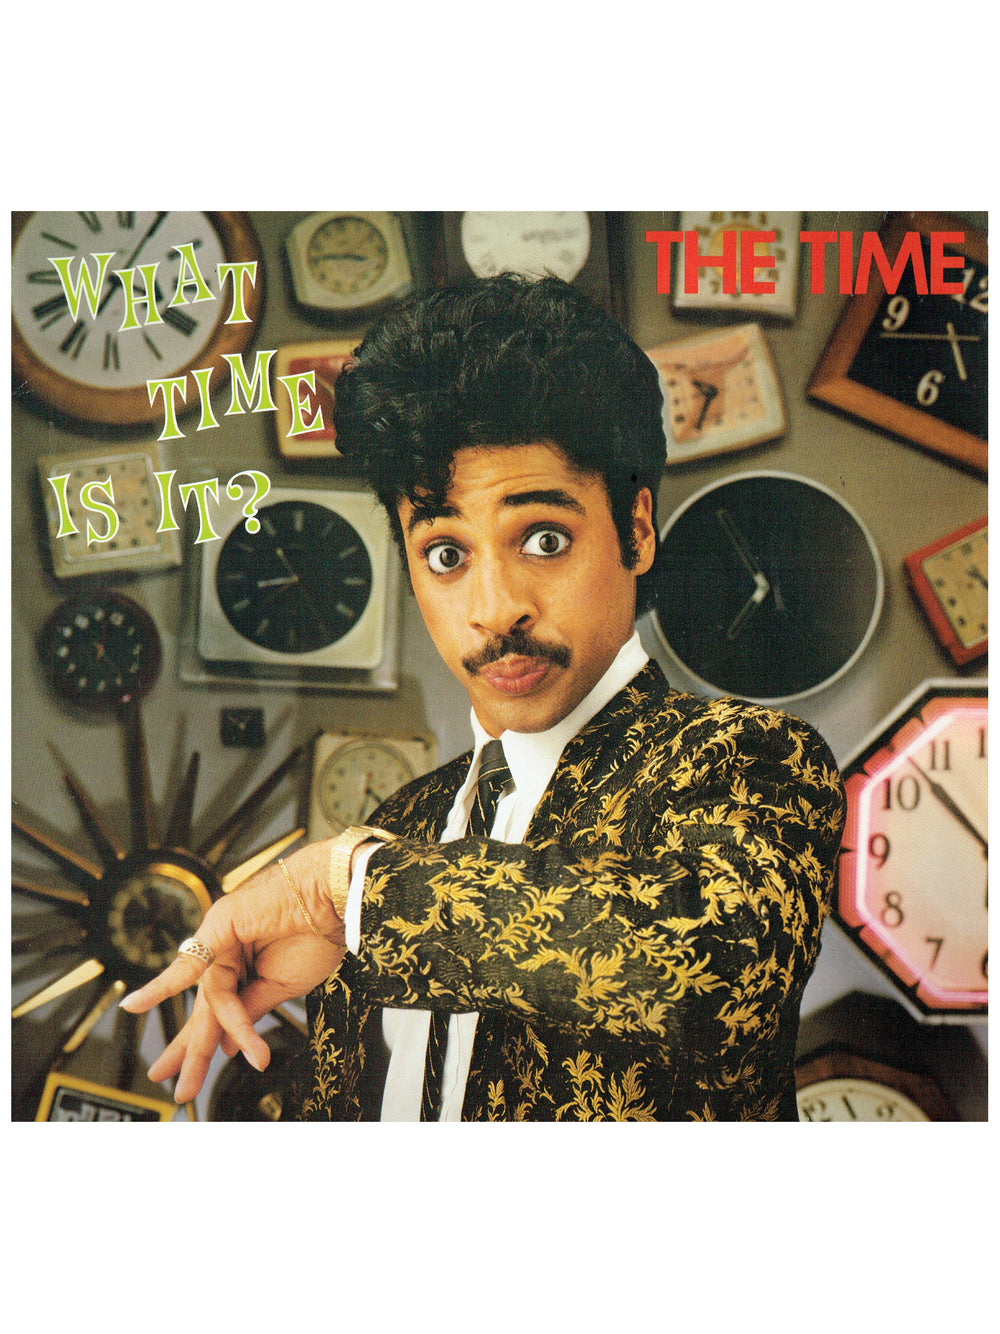 Prince – The Time What Time Is It? EU Italy Vinyl Album Original Release 1982 Prince